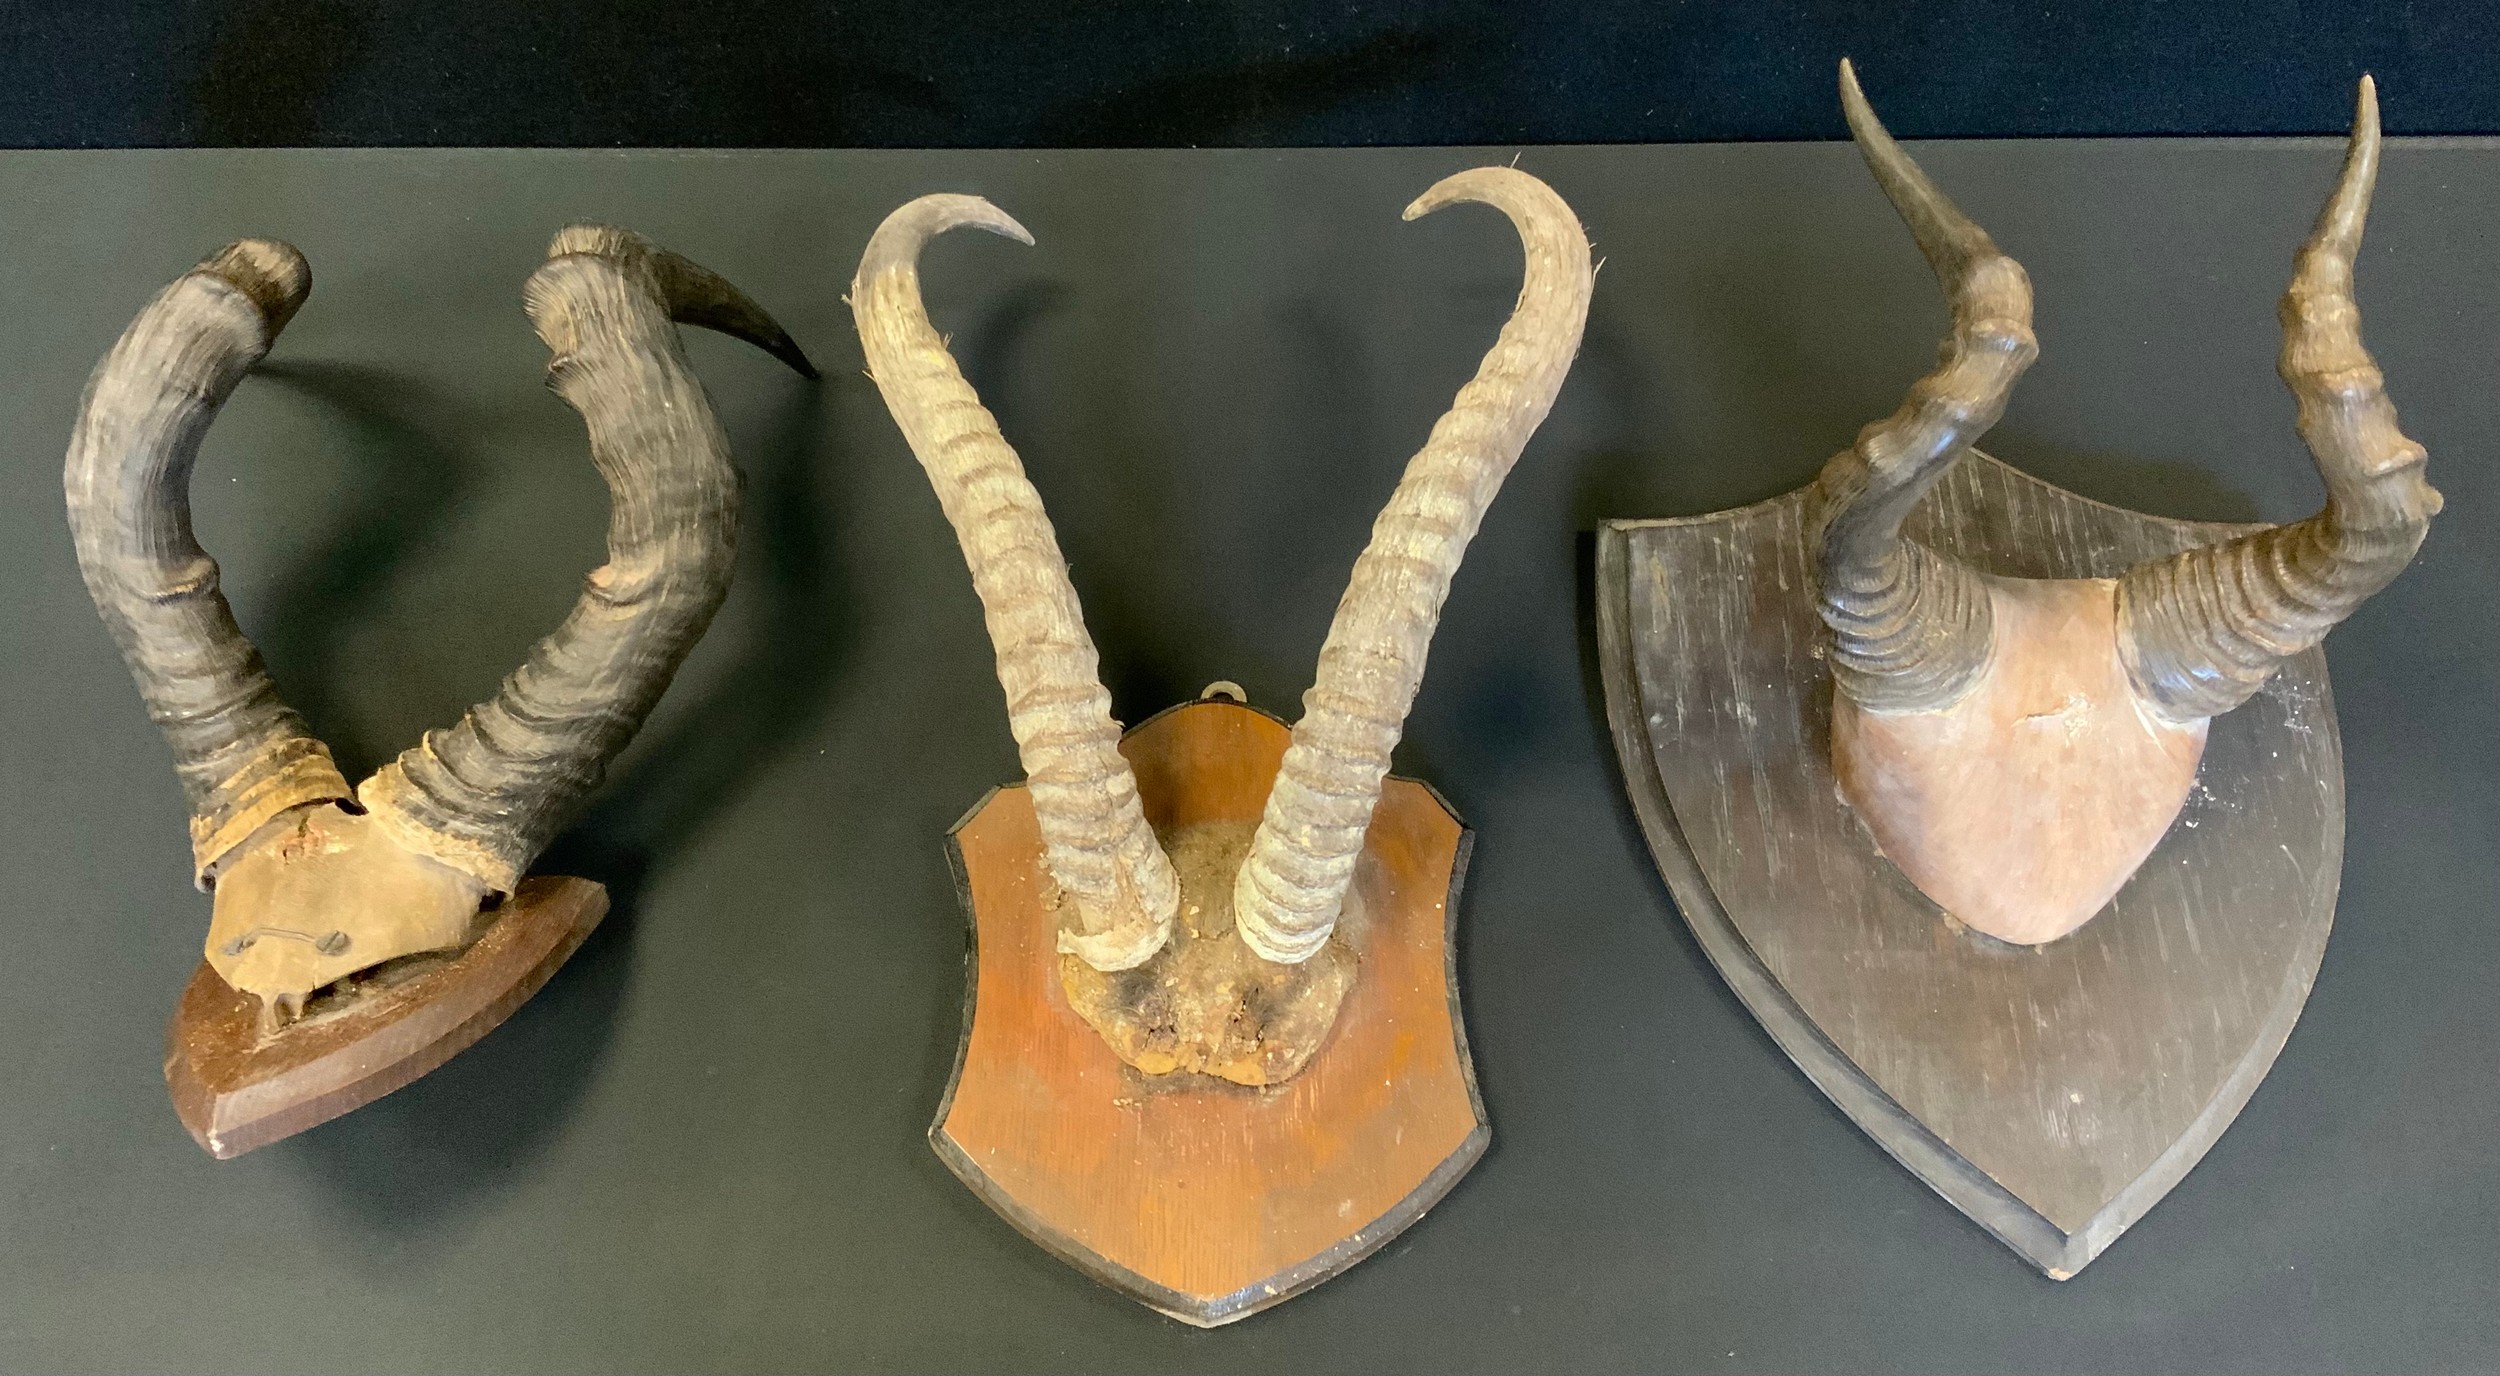 Taxidermy - a set of Impala horns, 32cm long, shield mount; others (3)